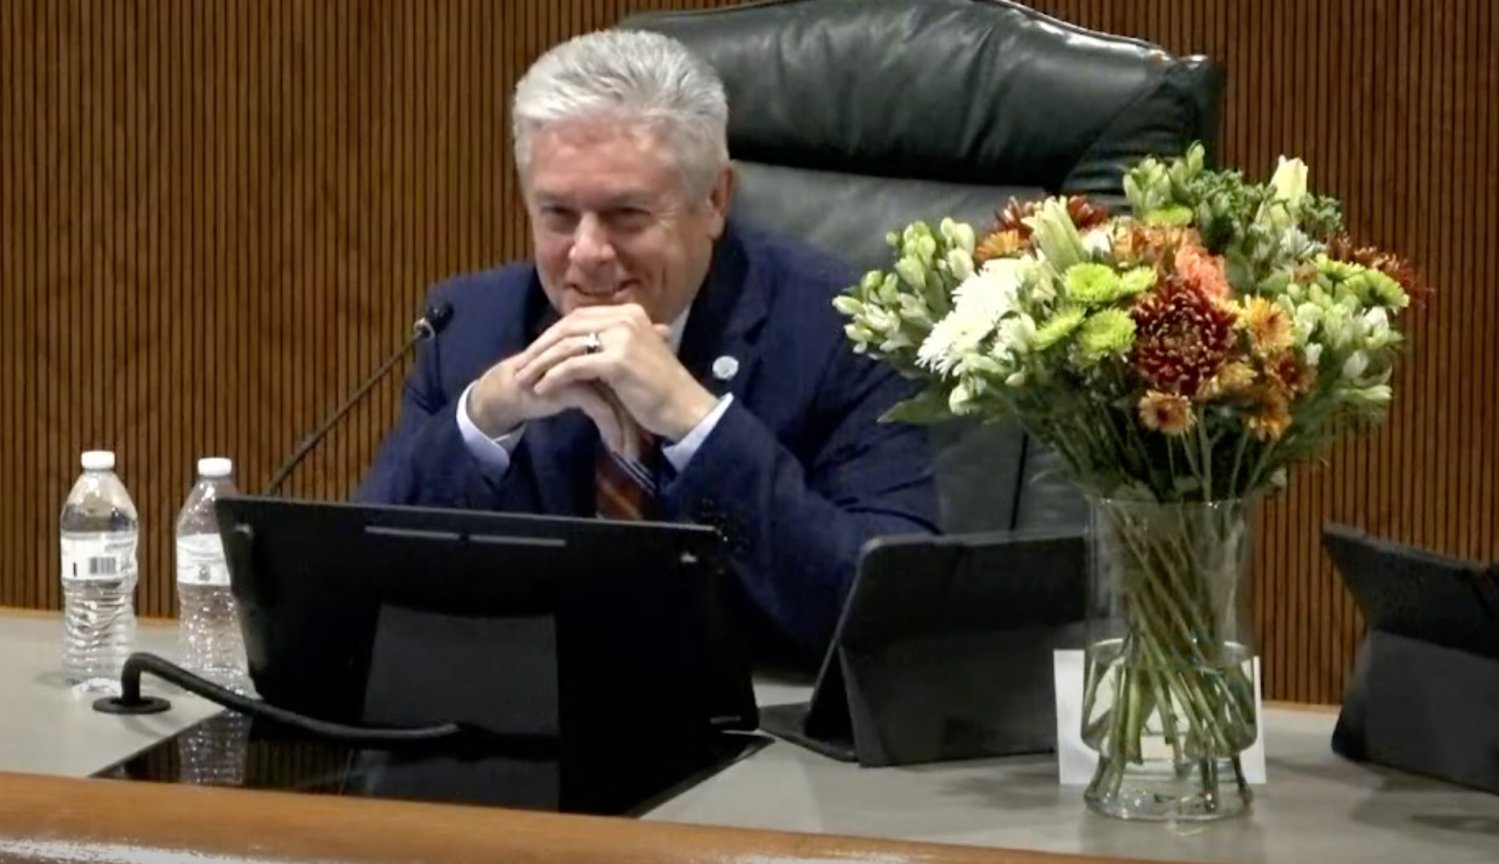 Commissioner Doug Bankson says goodbye to the Apopka City Council at its November 2nd meeting.